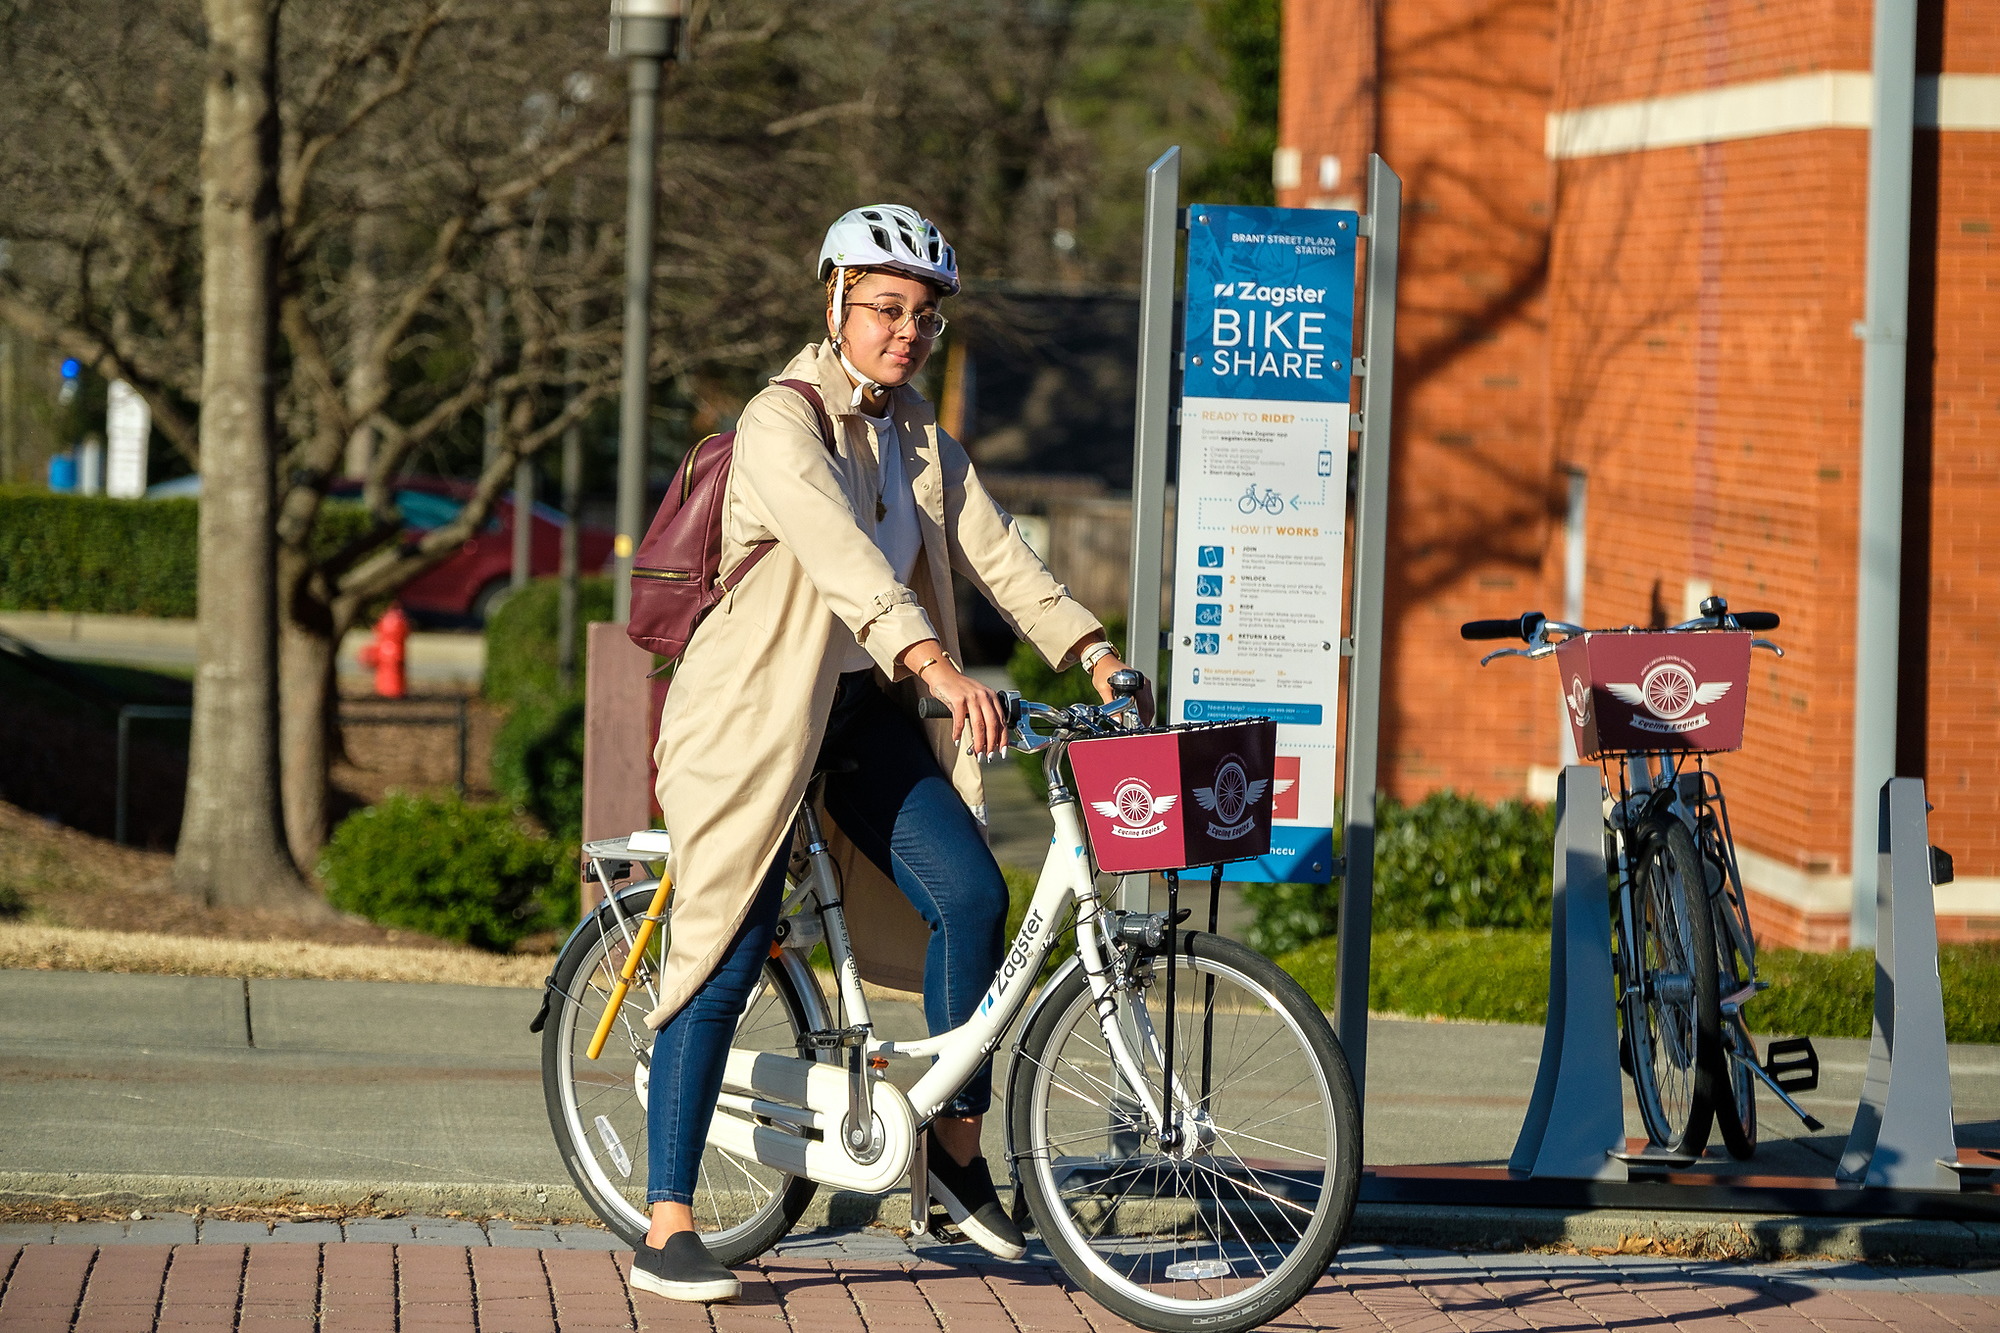 Student is sitting on Bike in-front of Zagster Bike share poster